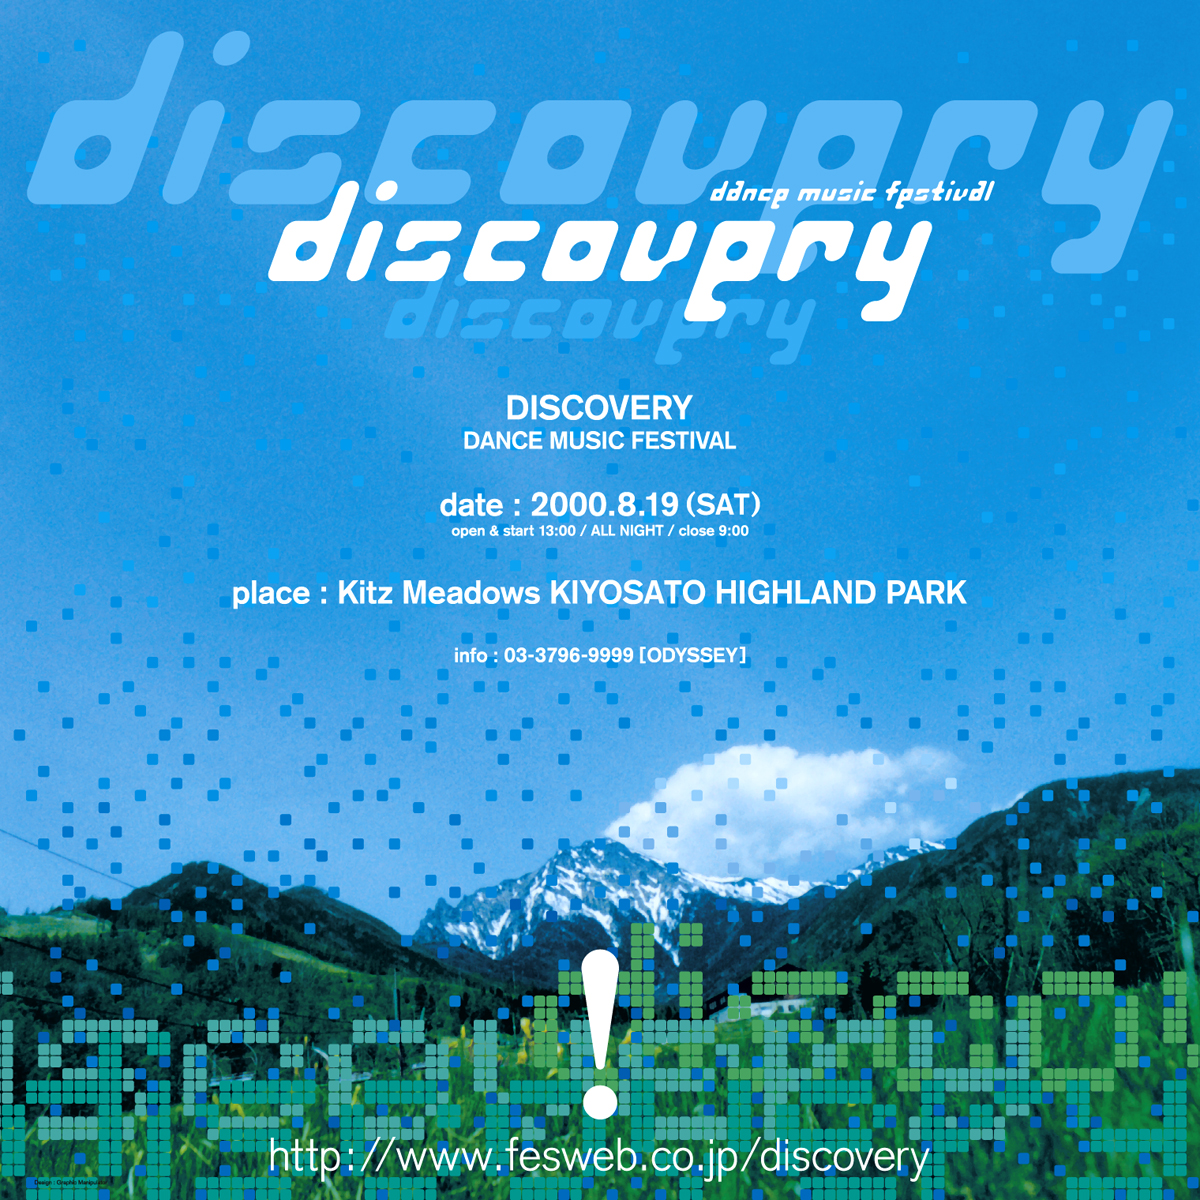 Dance Music festival “discovery”